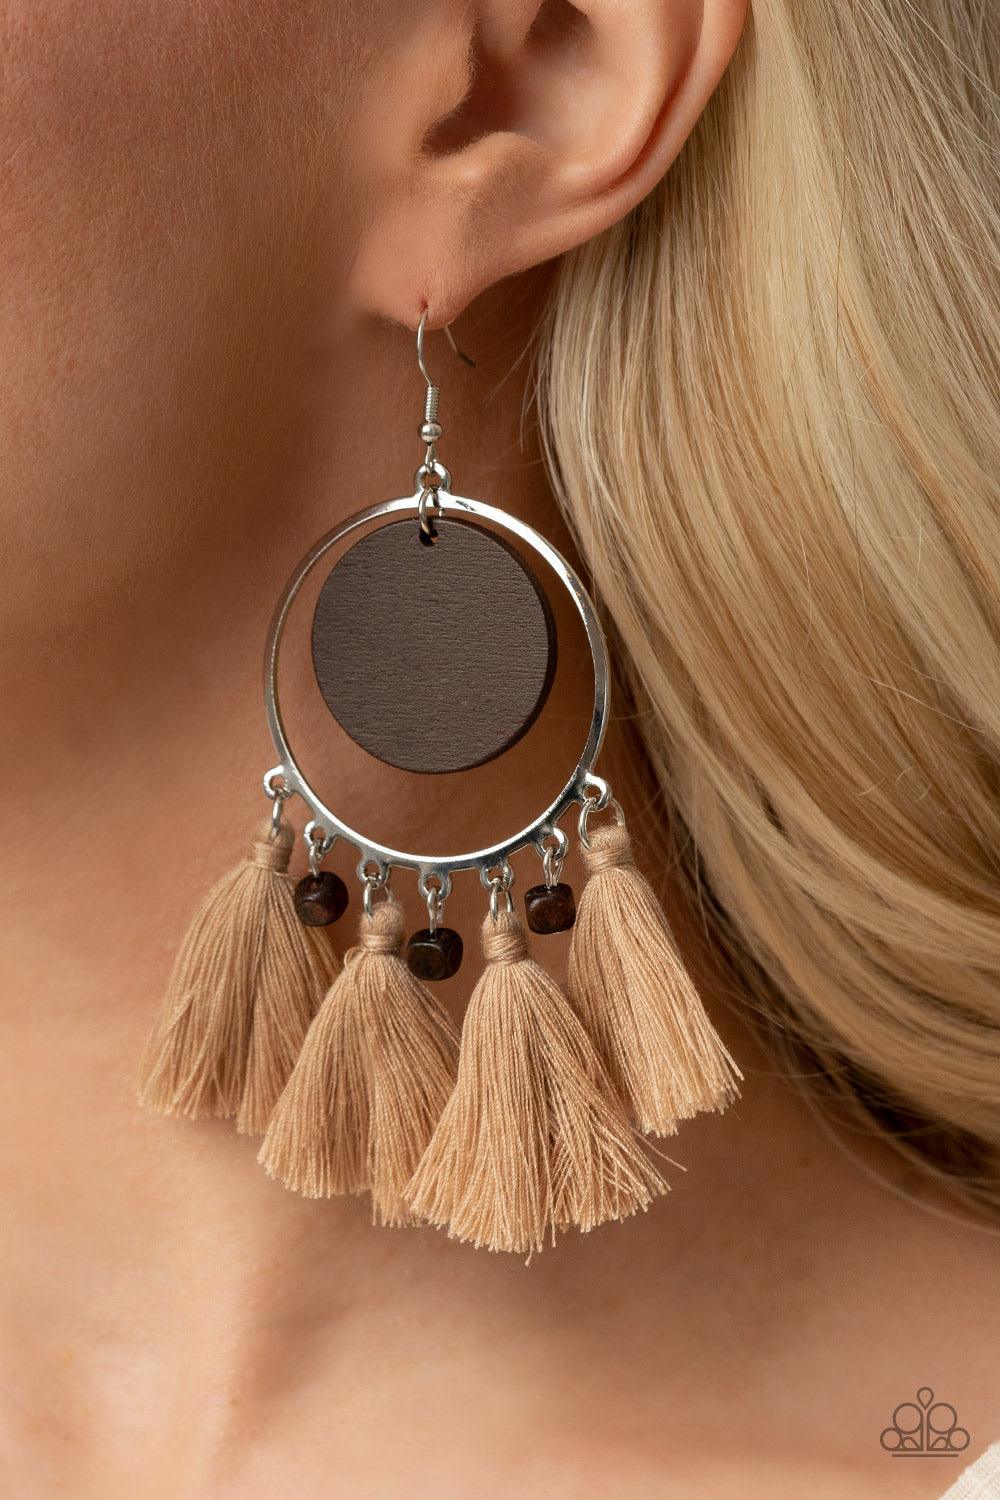 Paparazzi Accessories Yacht Bait - Brown A wooden disc swings from the top of a shiny silver hoop that is adorned in dainty wooden cube beads and Desert Mist threaded tassels, creating an earthy fringe. Earring attaches to a standard fishhook fitting. Sol